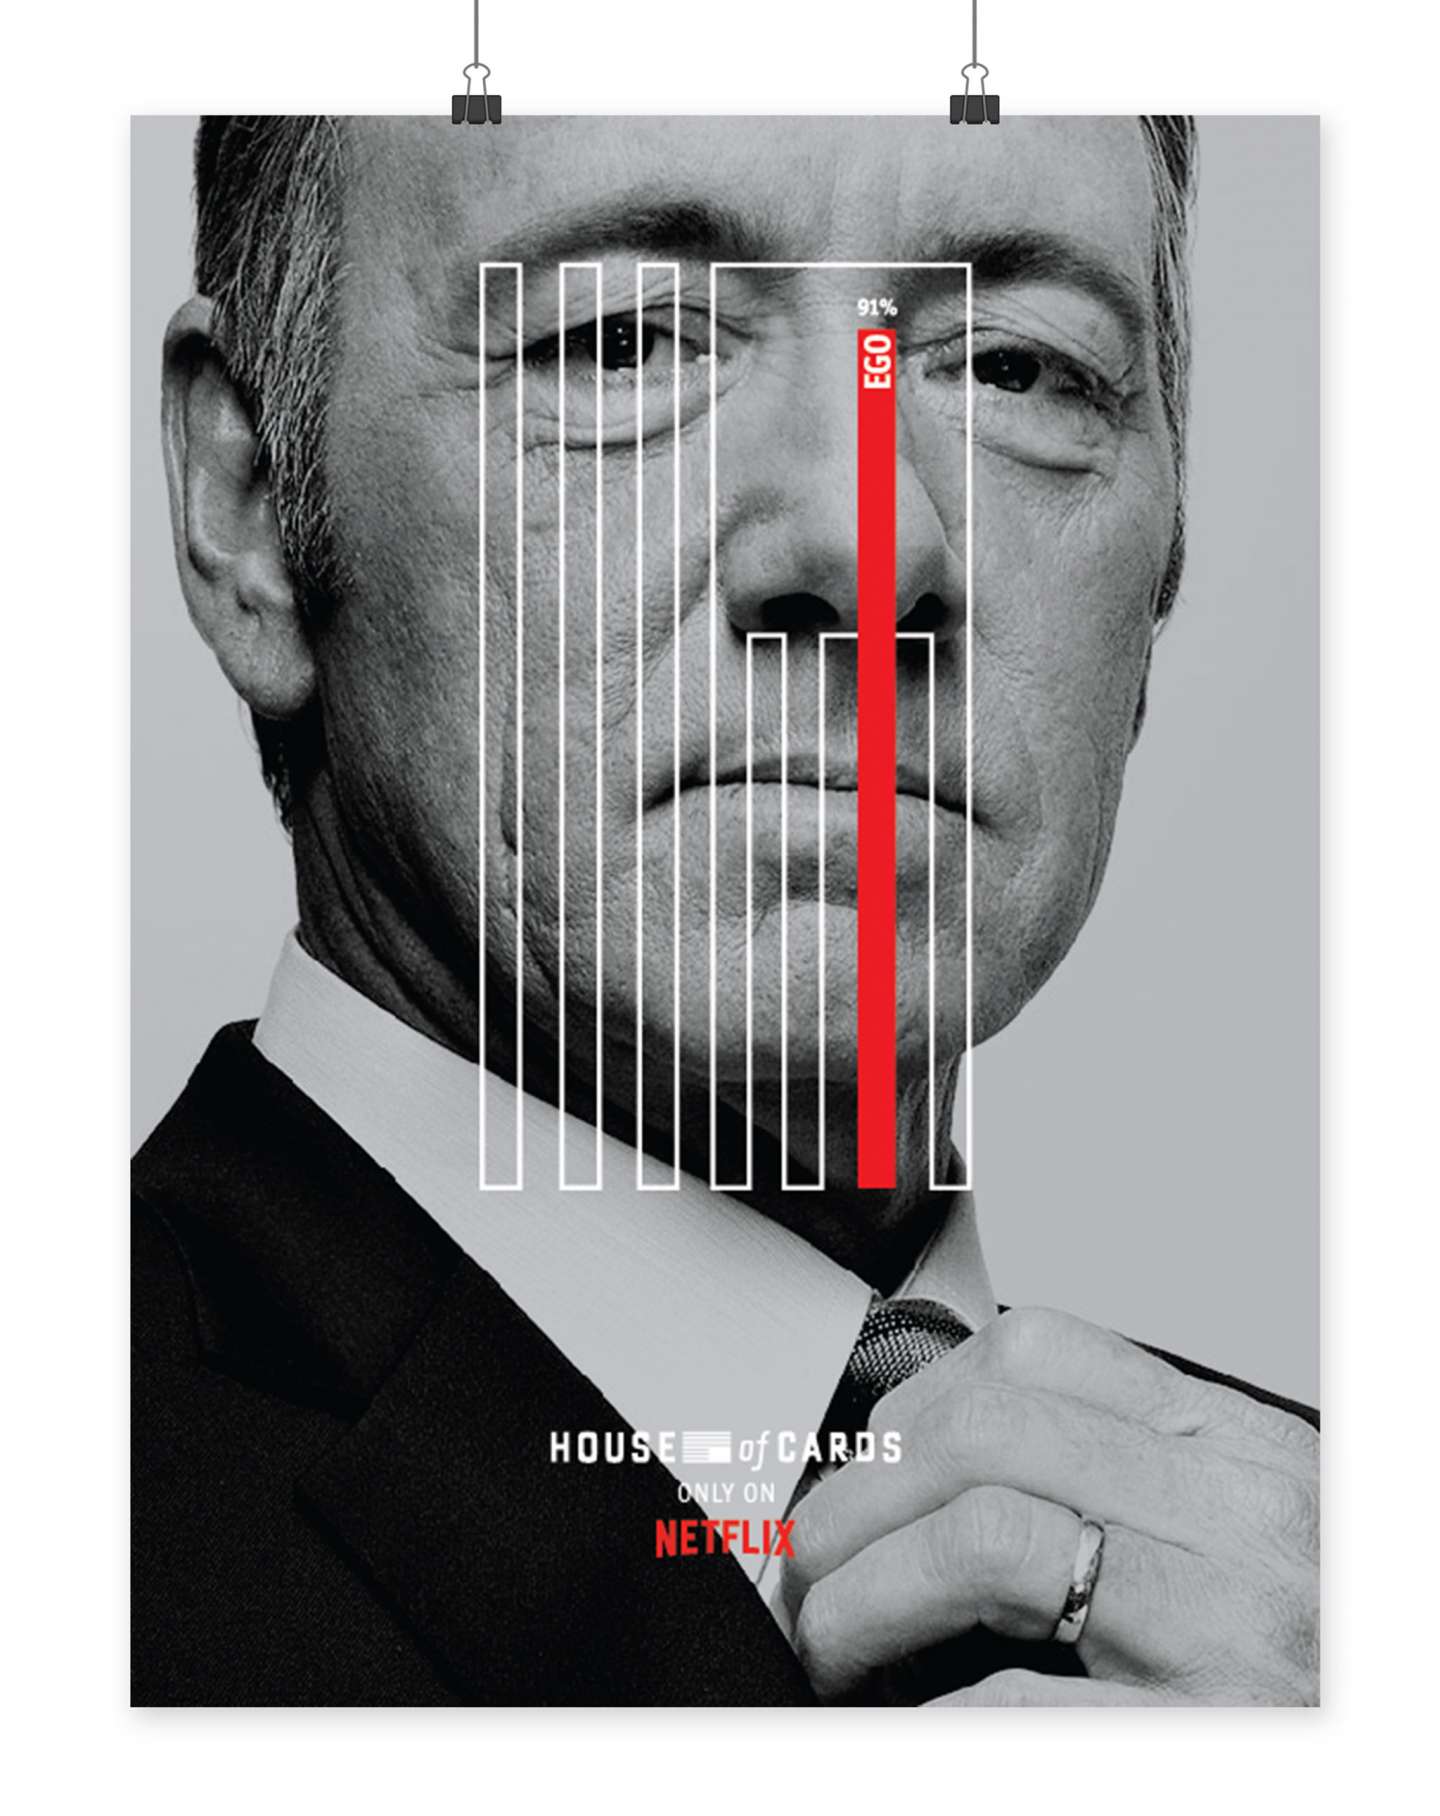 POSTER SERIES: HOUSE OF CARDS